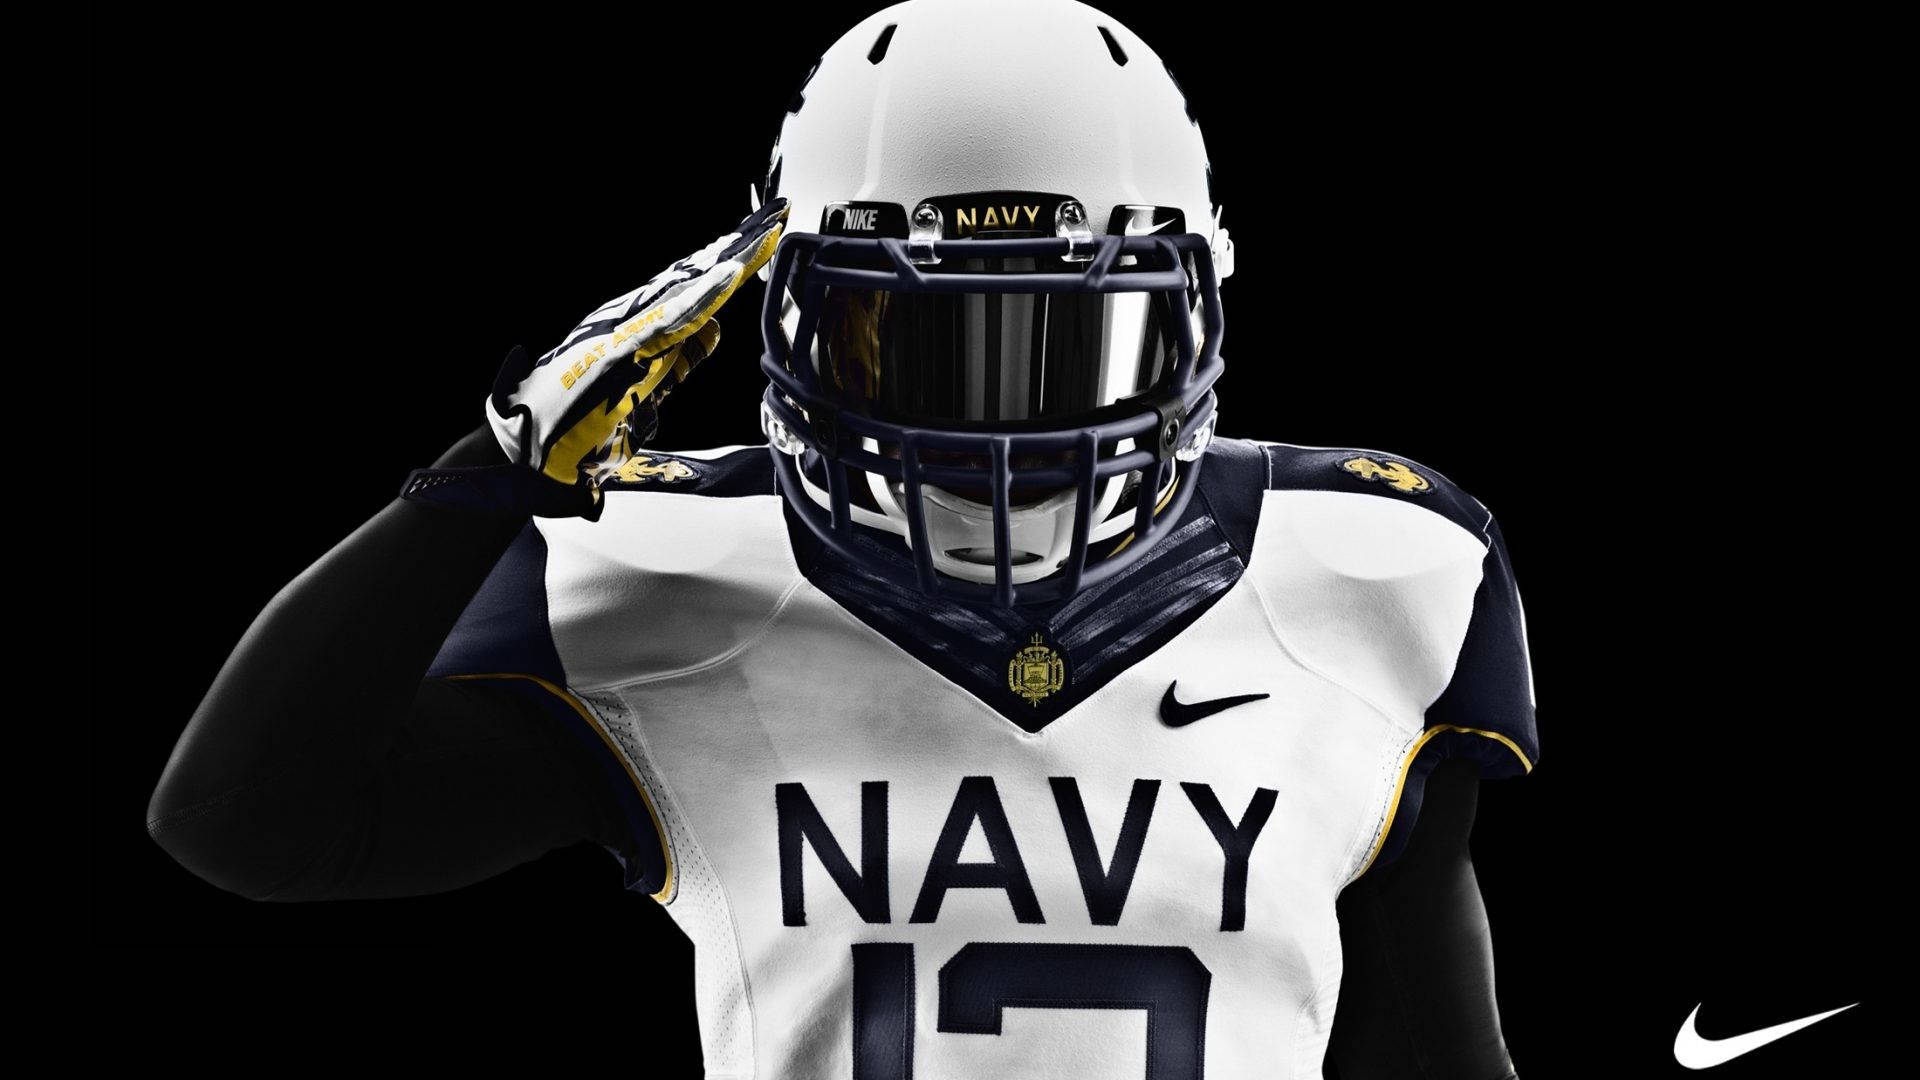 Pulsating performances from the Navy Midshipmen make for a spectacular display of College Football Wallpaper